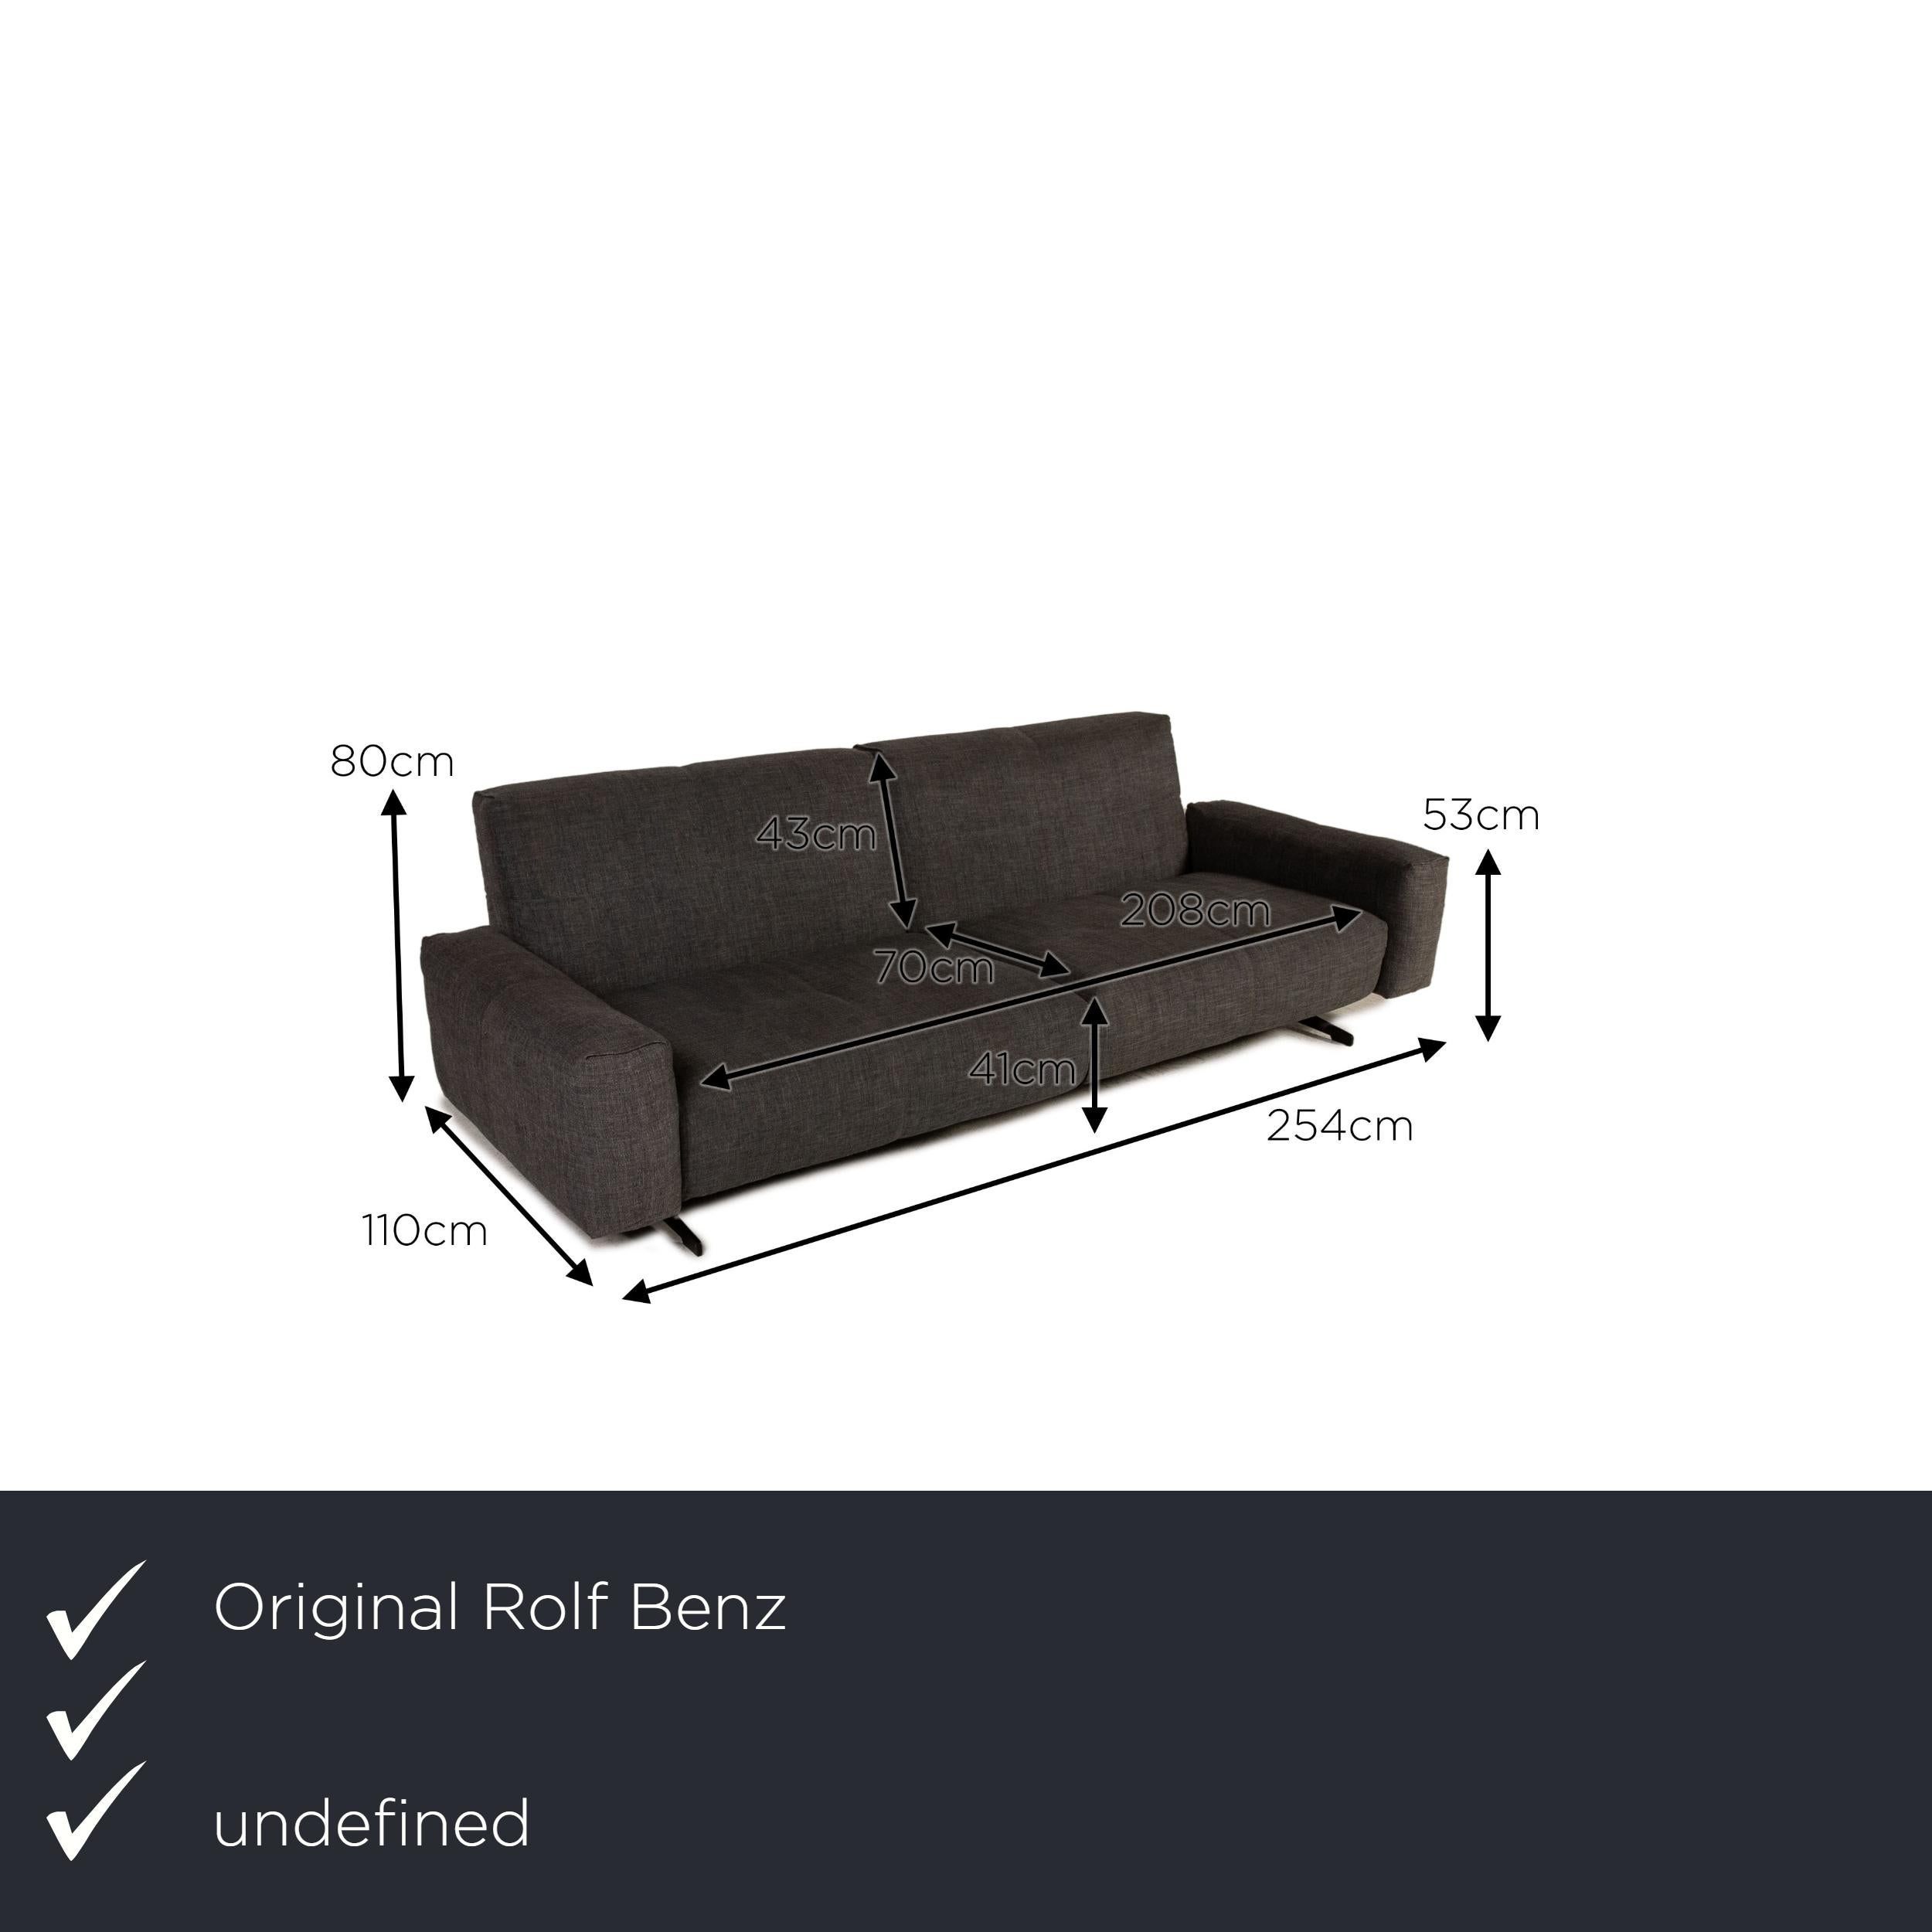 We present to you a Rolf Benz 50 fabric sofa set gray 1x four-seater 1x stool relaxation function.

Product measurements in centimeters:

depth: 110
width: 254
height: 80
seat height: 41
rest height: 53
seat depth: 70
seat width: 208
back